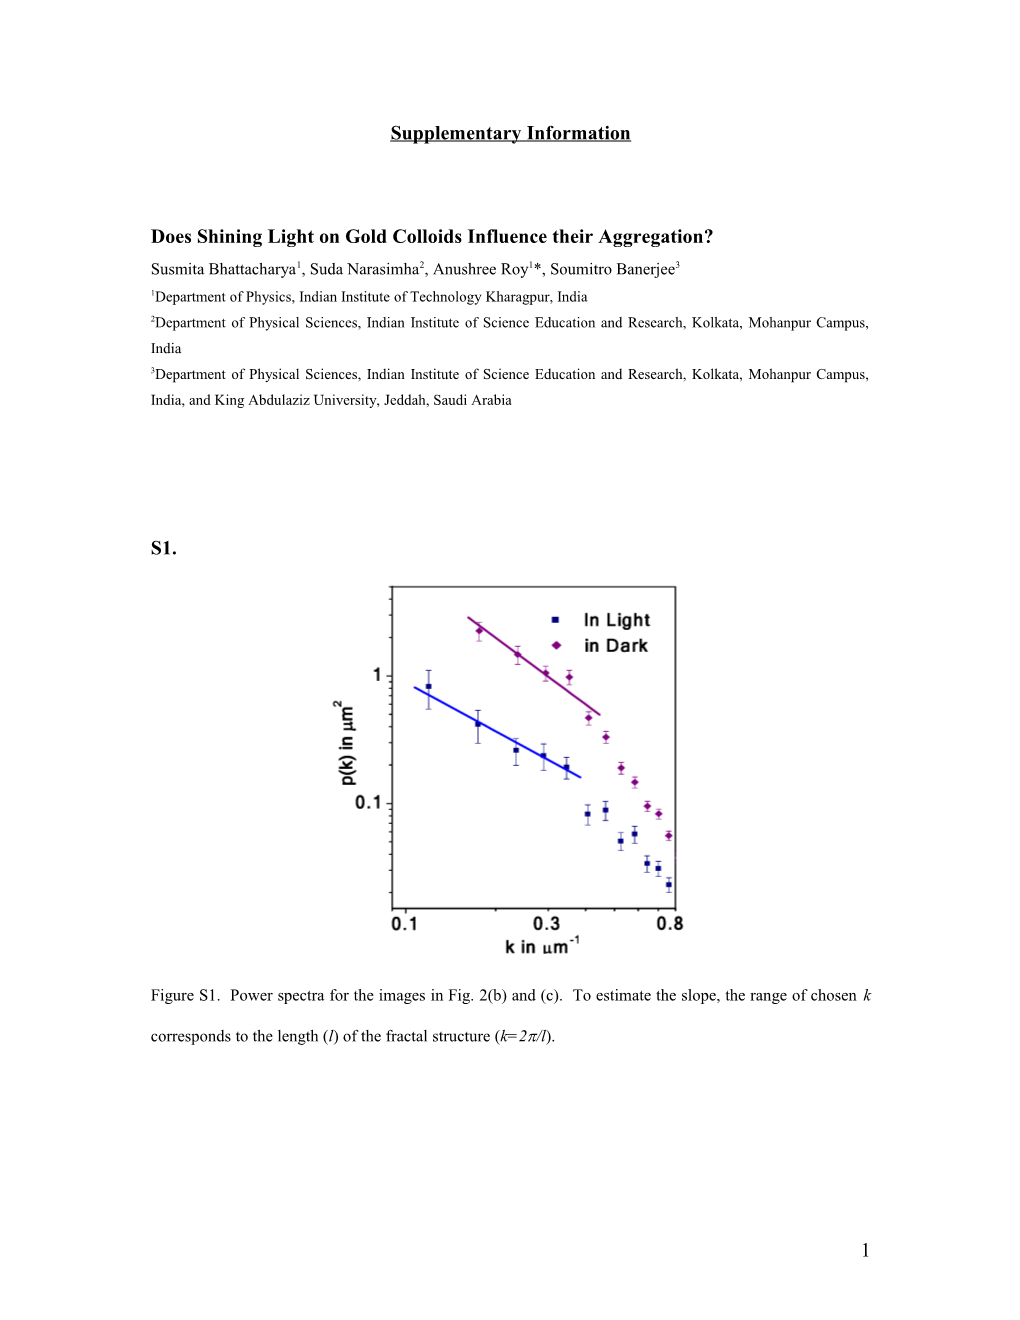 Does Shining Light on Gold Colloids Influence Their Aggregation?